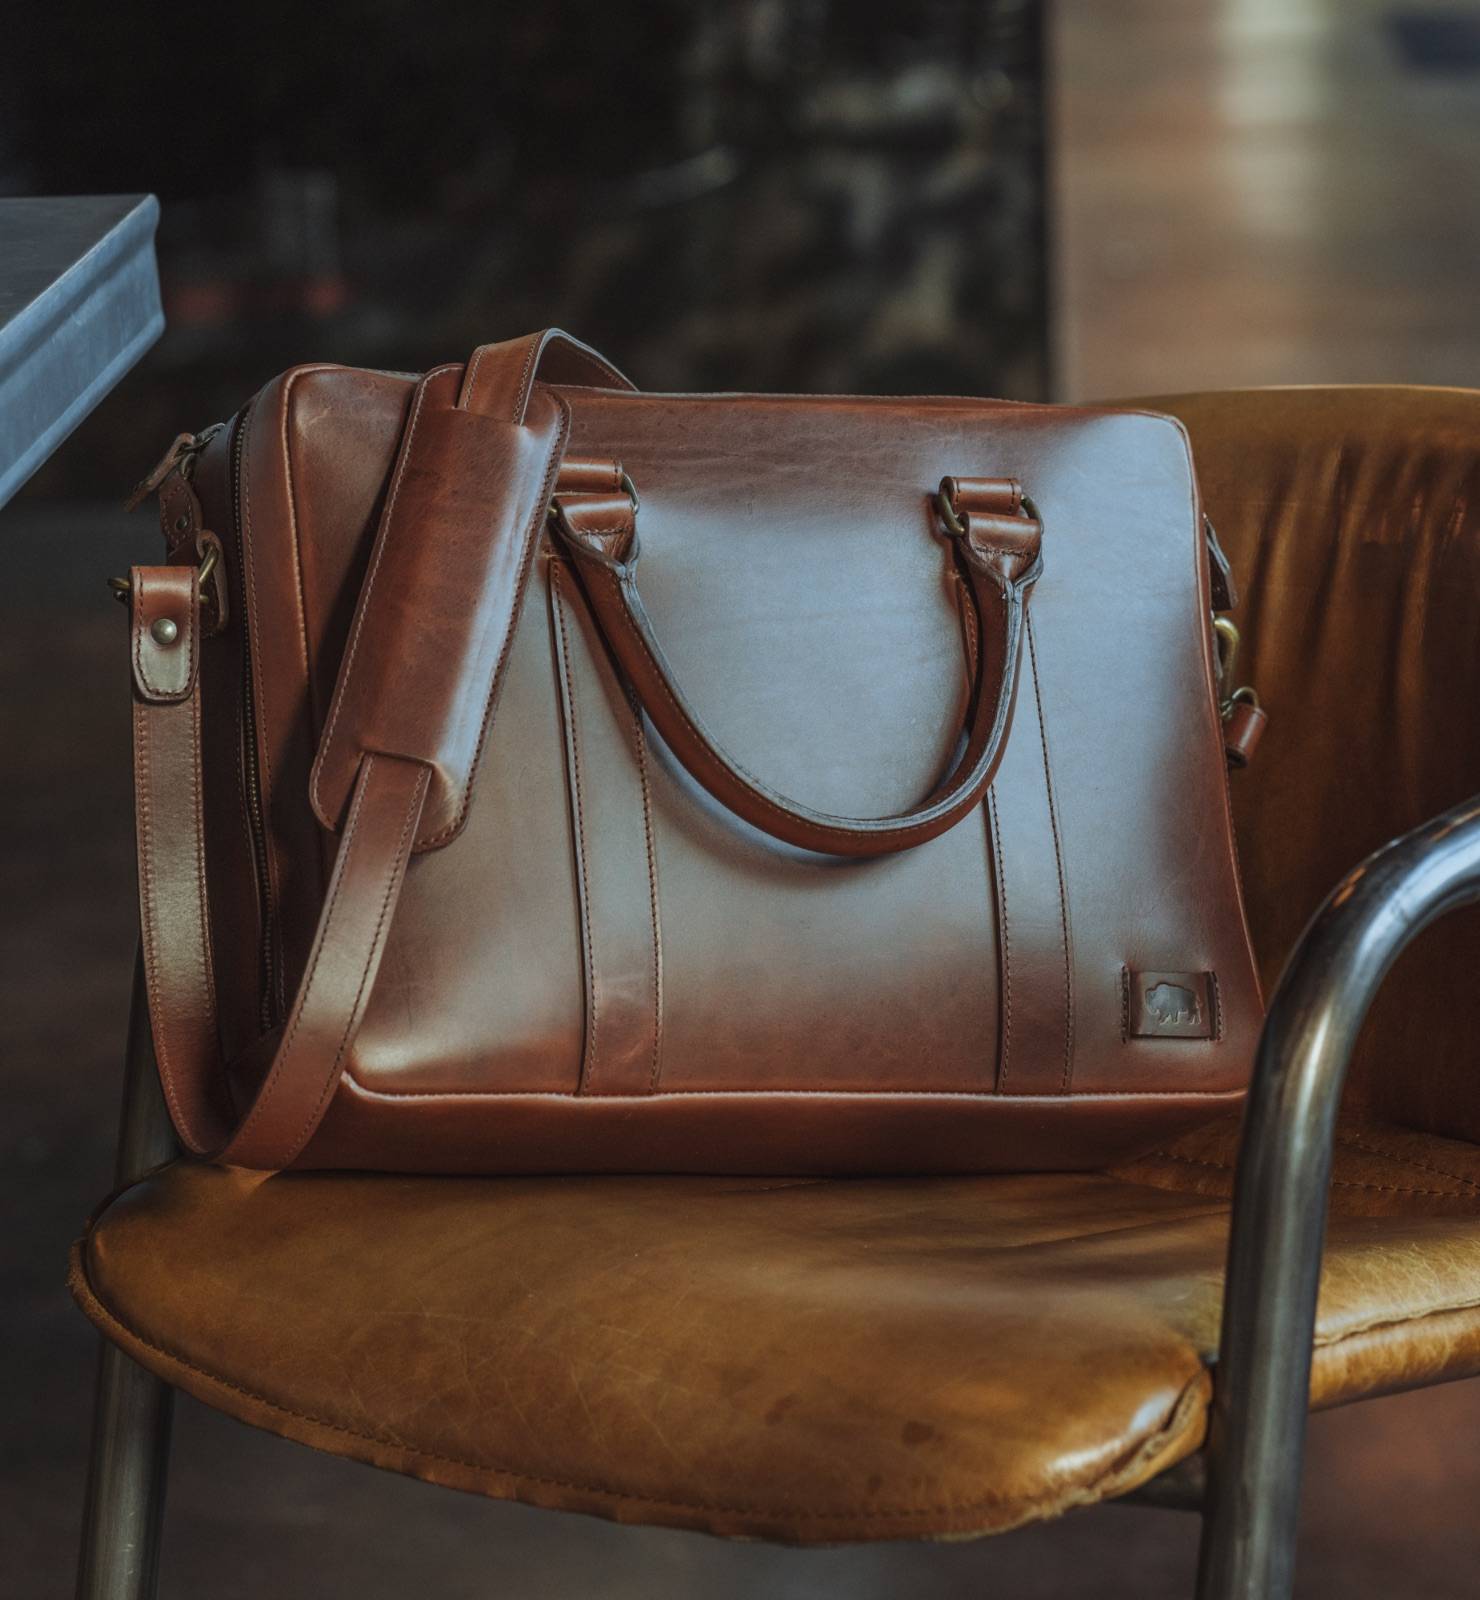 Full Grain Leather vs. Top Grain Leather - What's the Difference?